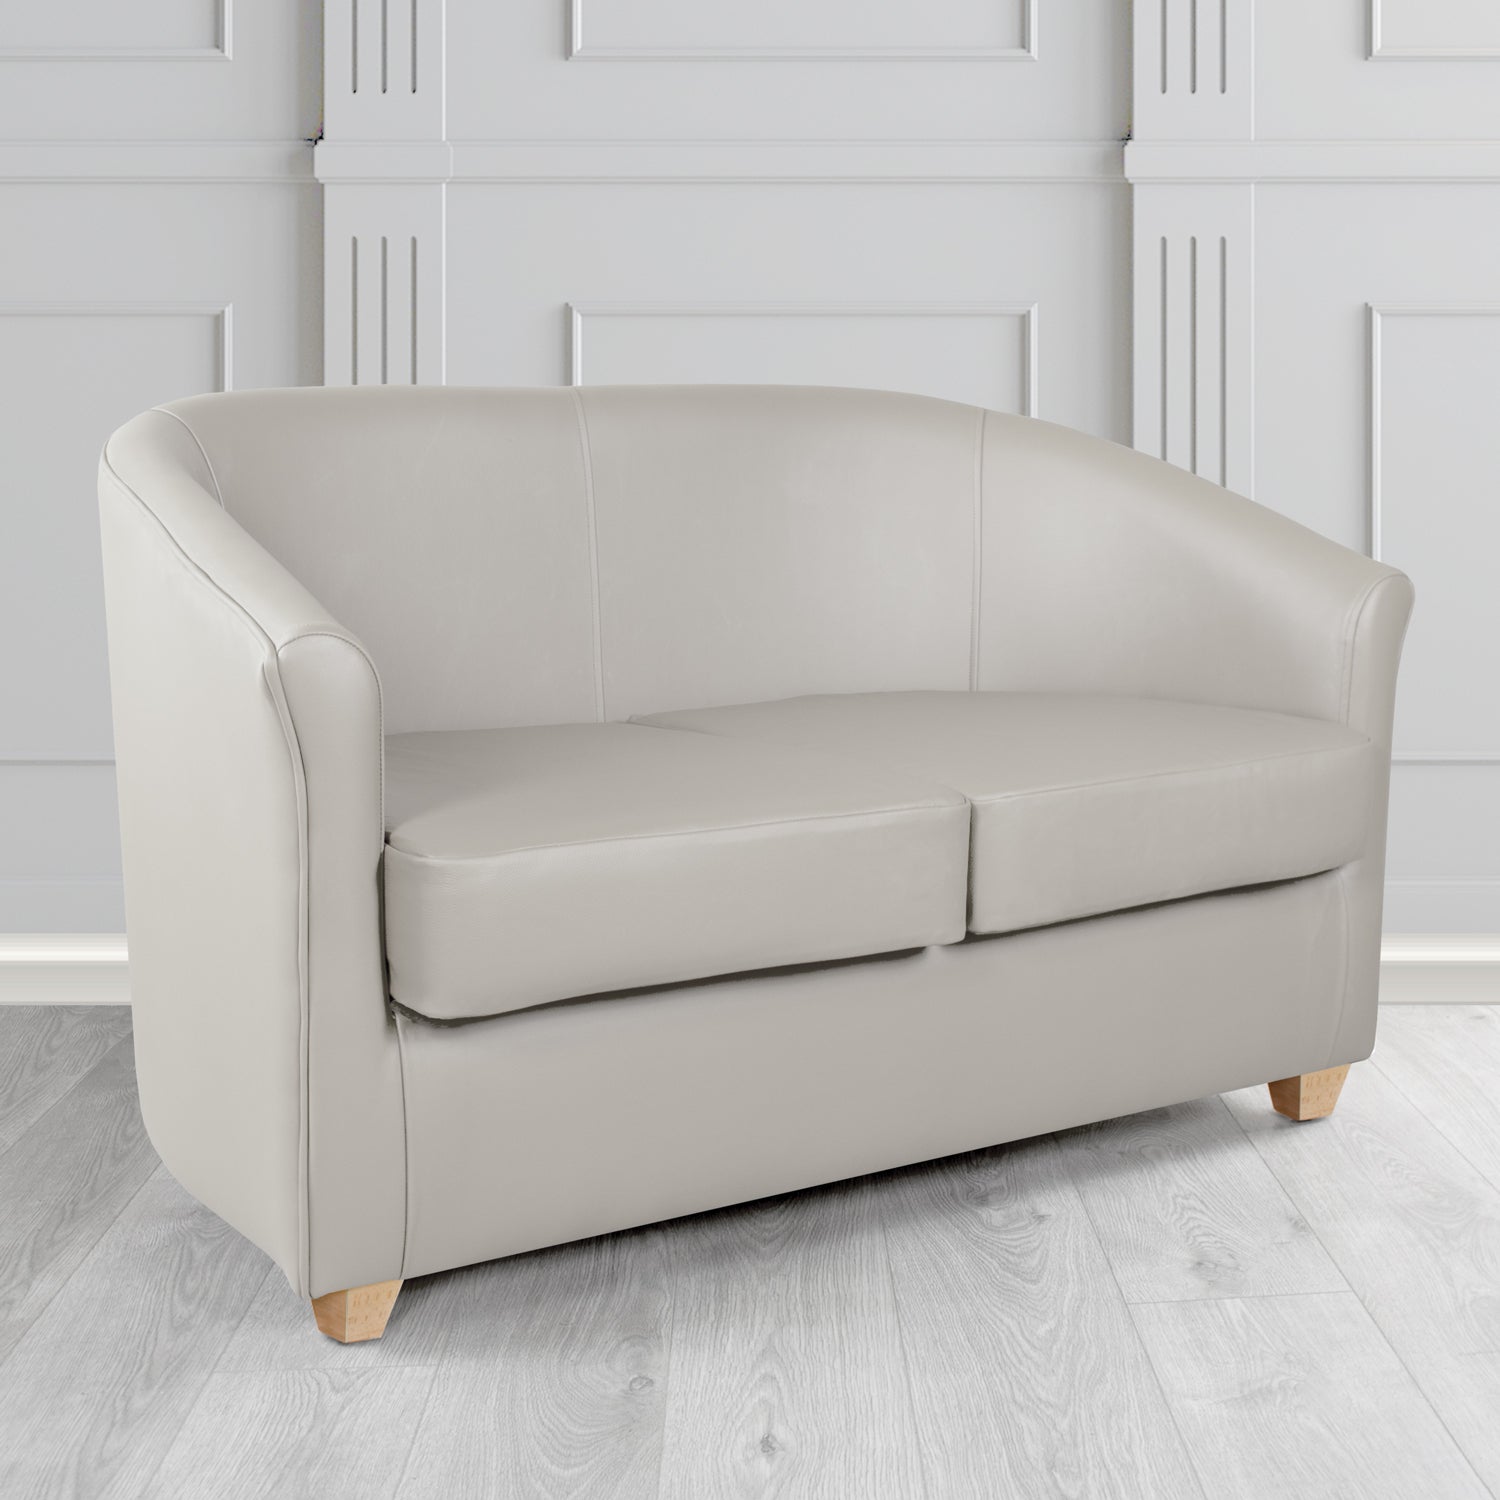 Cannes 2 Seater Tub Sofa in Just Colour Putty Crib 5 Faux Leather - The Tub Chair Shop